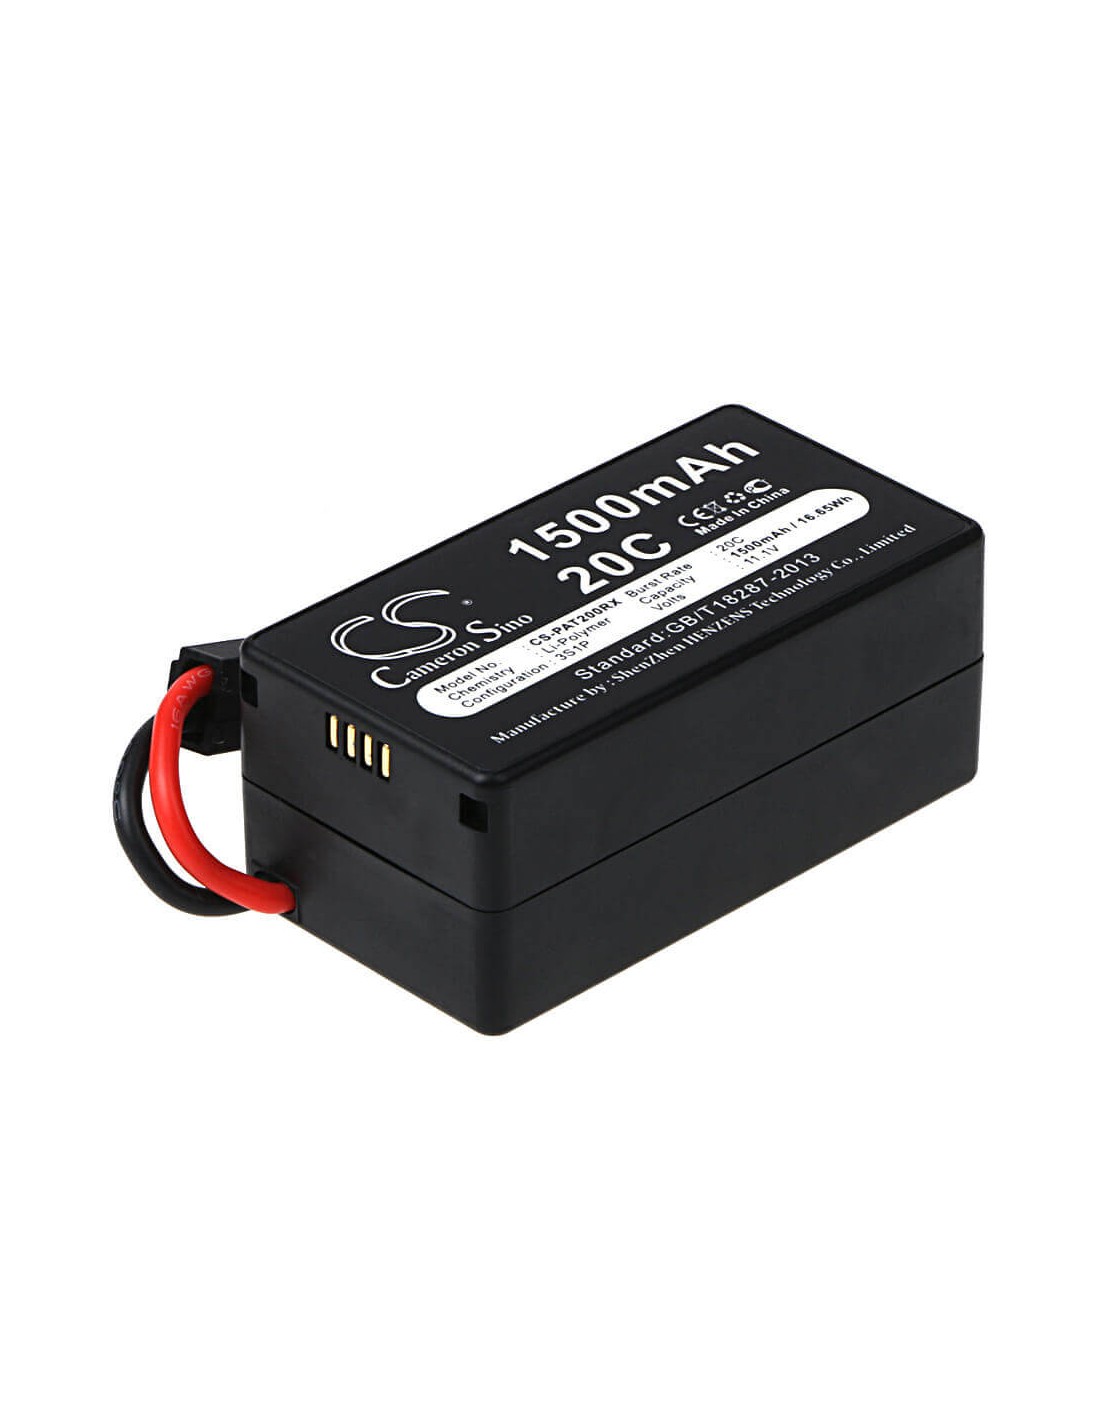 Battery for PARROT, AR.Drone 1.0, AR.Drone 2.0, AR.Drone 2.0 HD 11.1V, 1500mAh - 16.65Wh